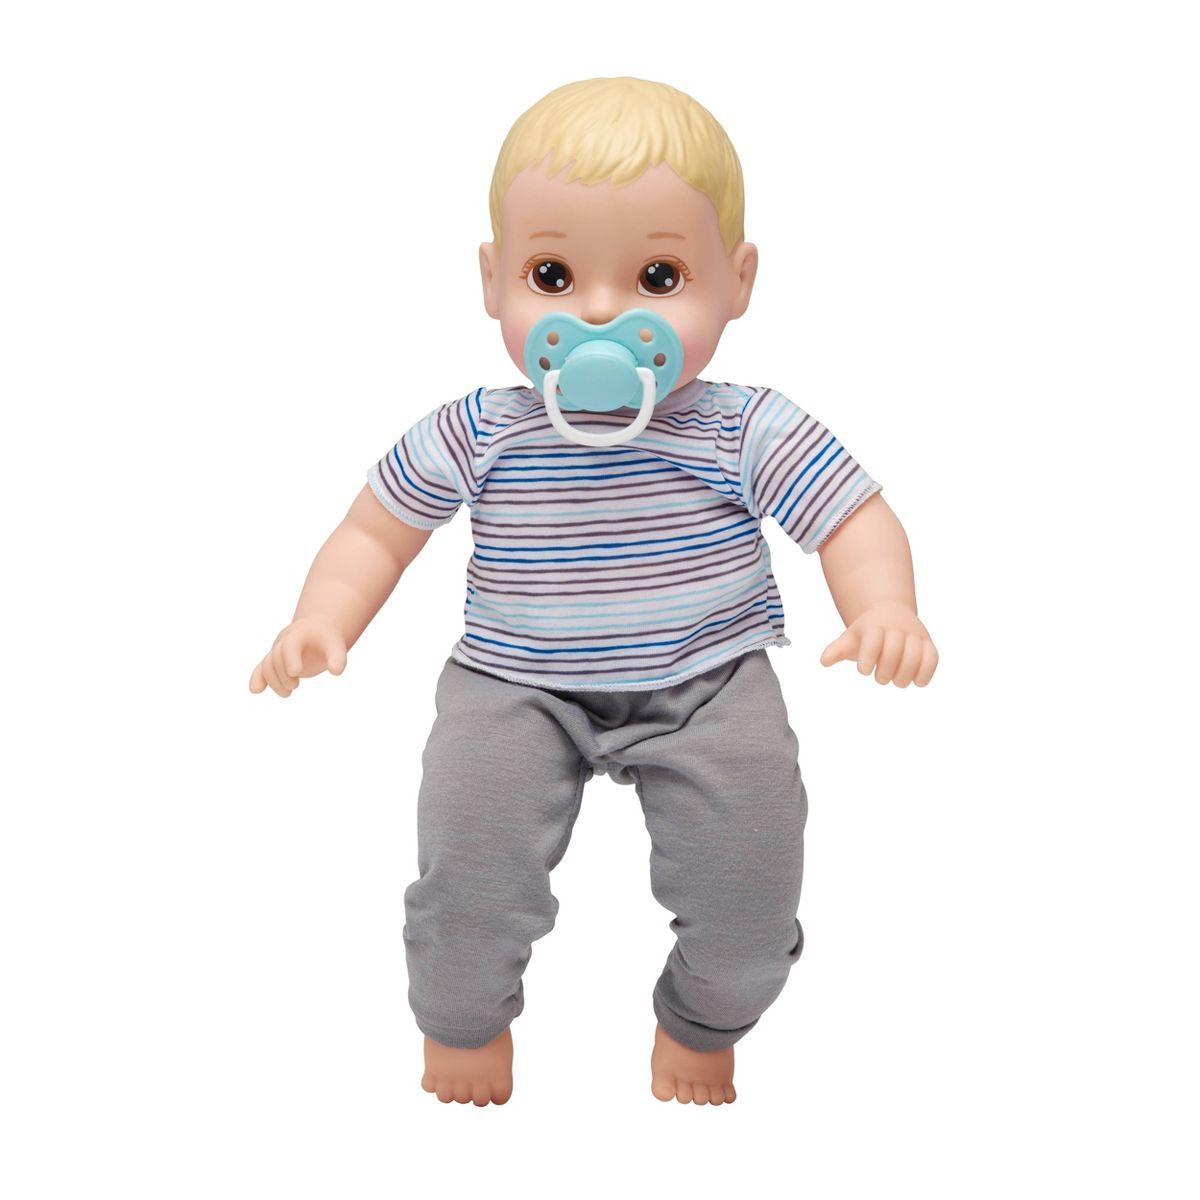 Perfectly Cute My Sweet Baby 14" Baby Doll - Blonde with Brown Eyes | Target